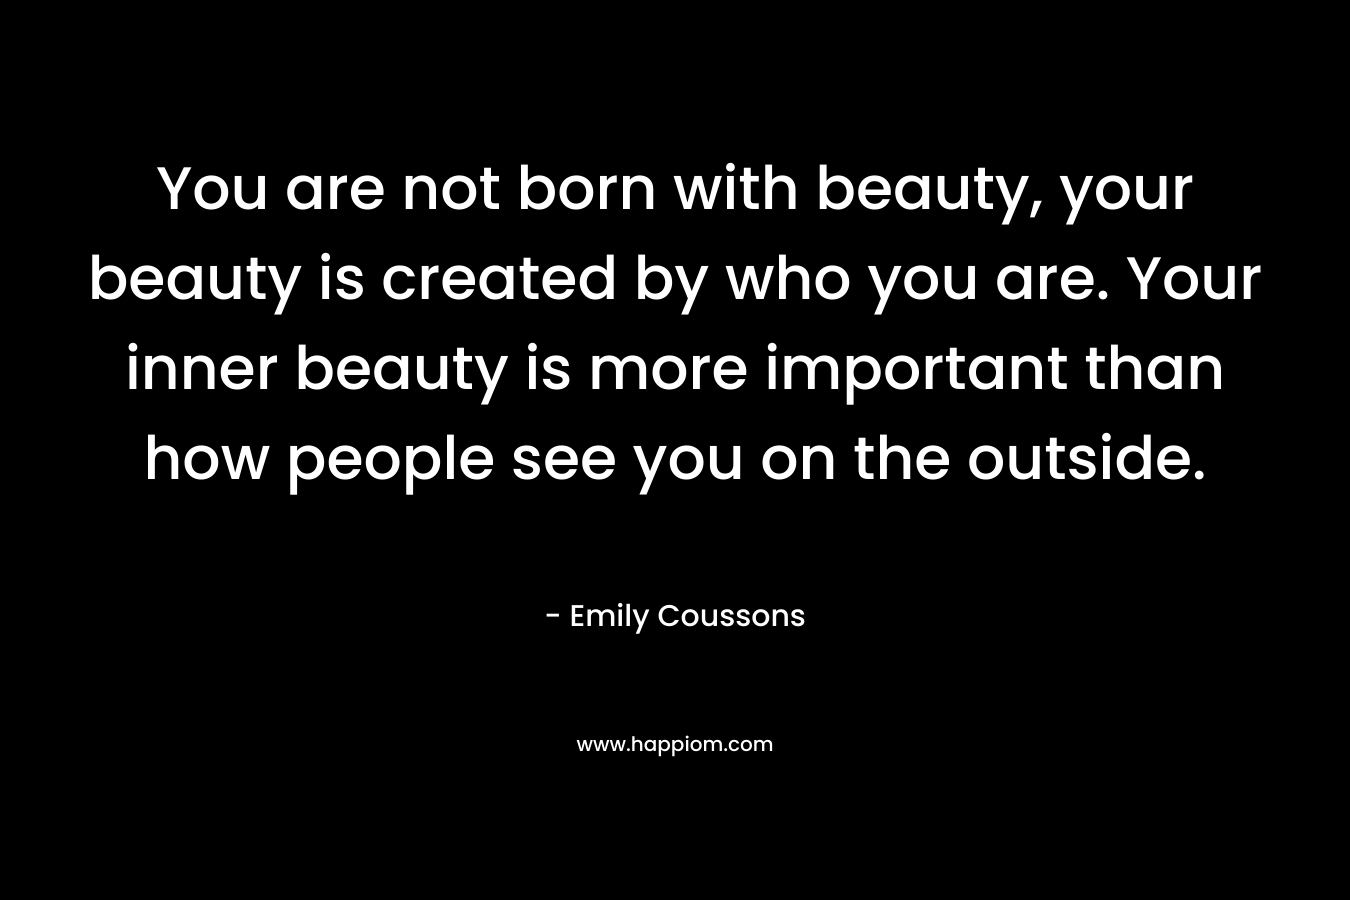 You are not born with beauty, your beauty is created by who you are. Your inner beauty is more important than how people see you on the outside.